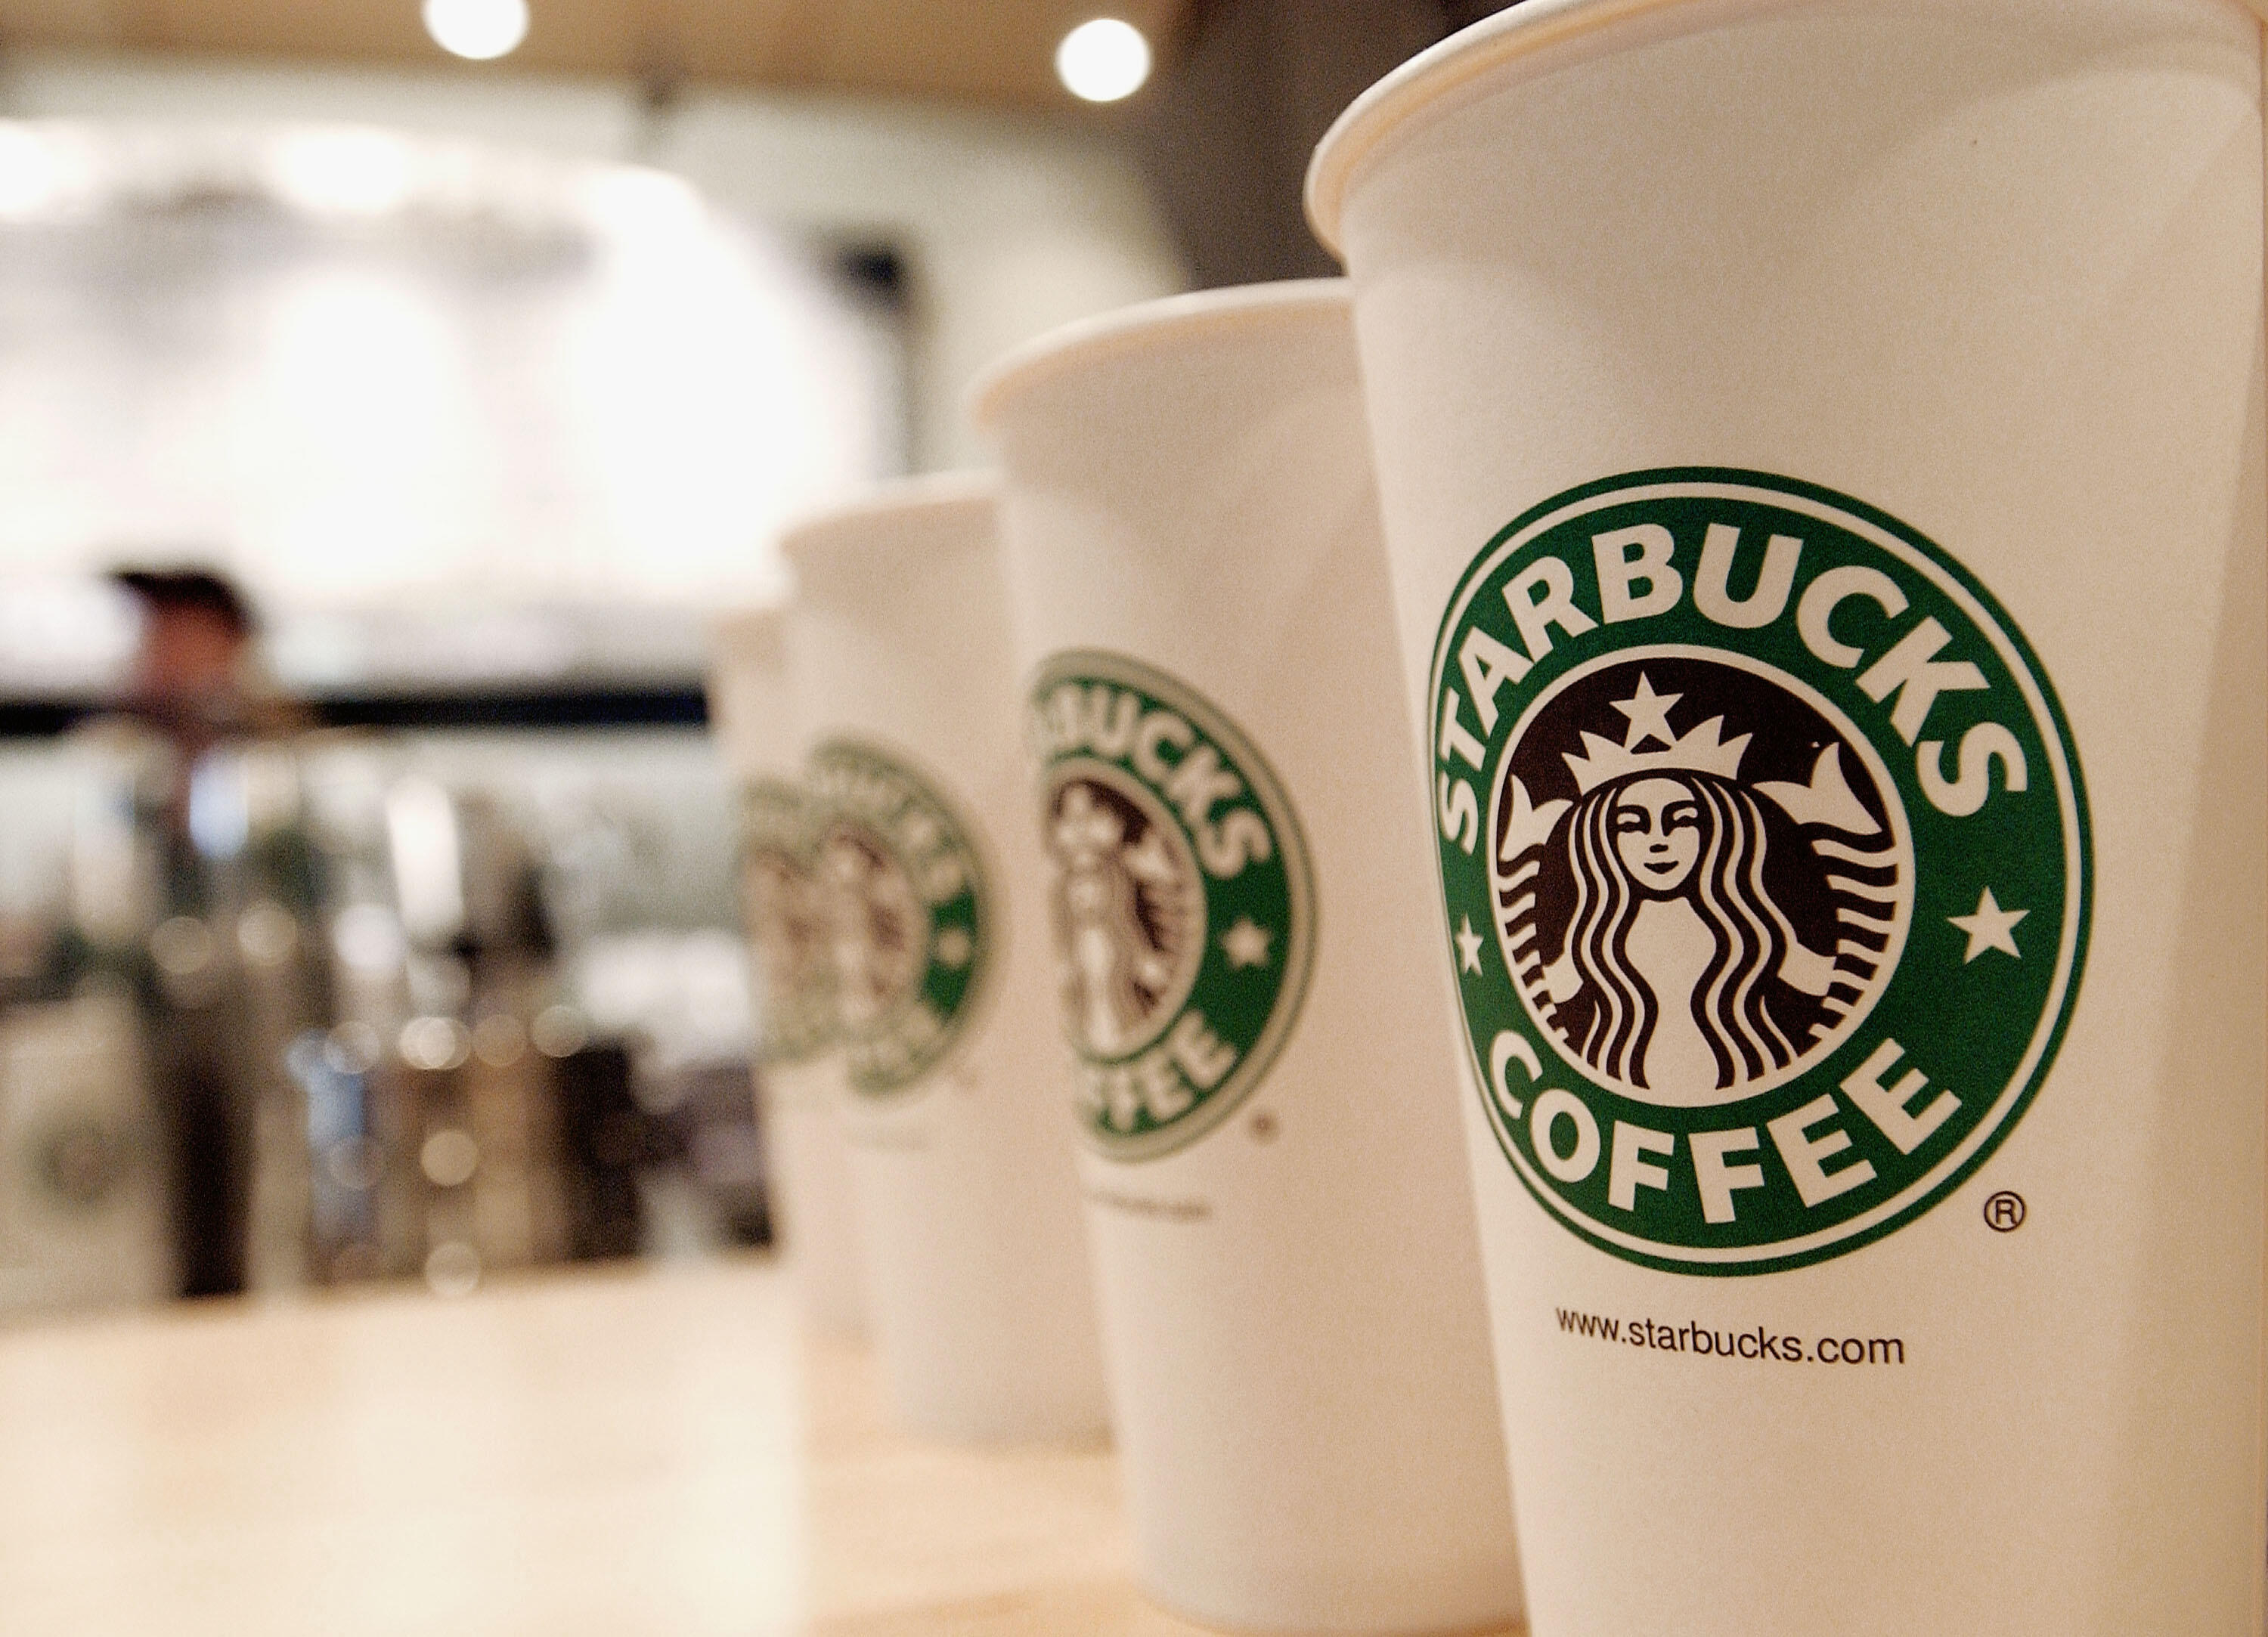 Starbucks Reveals Plan To More EcoFriendly By 2030 iHeart